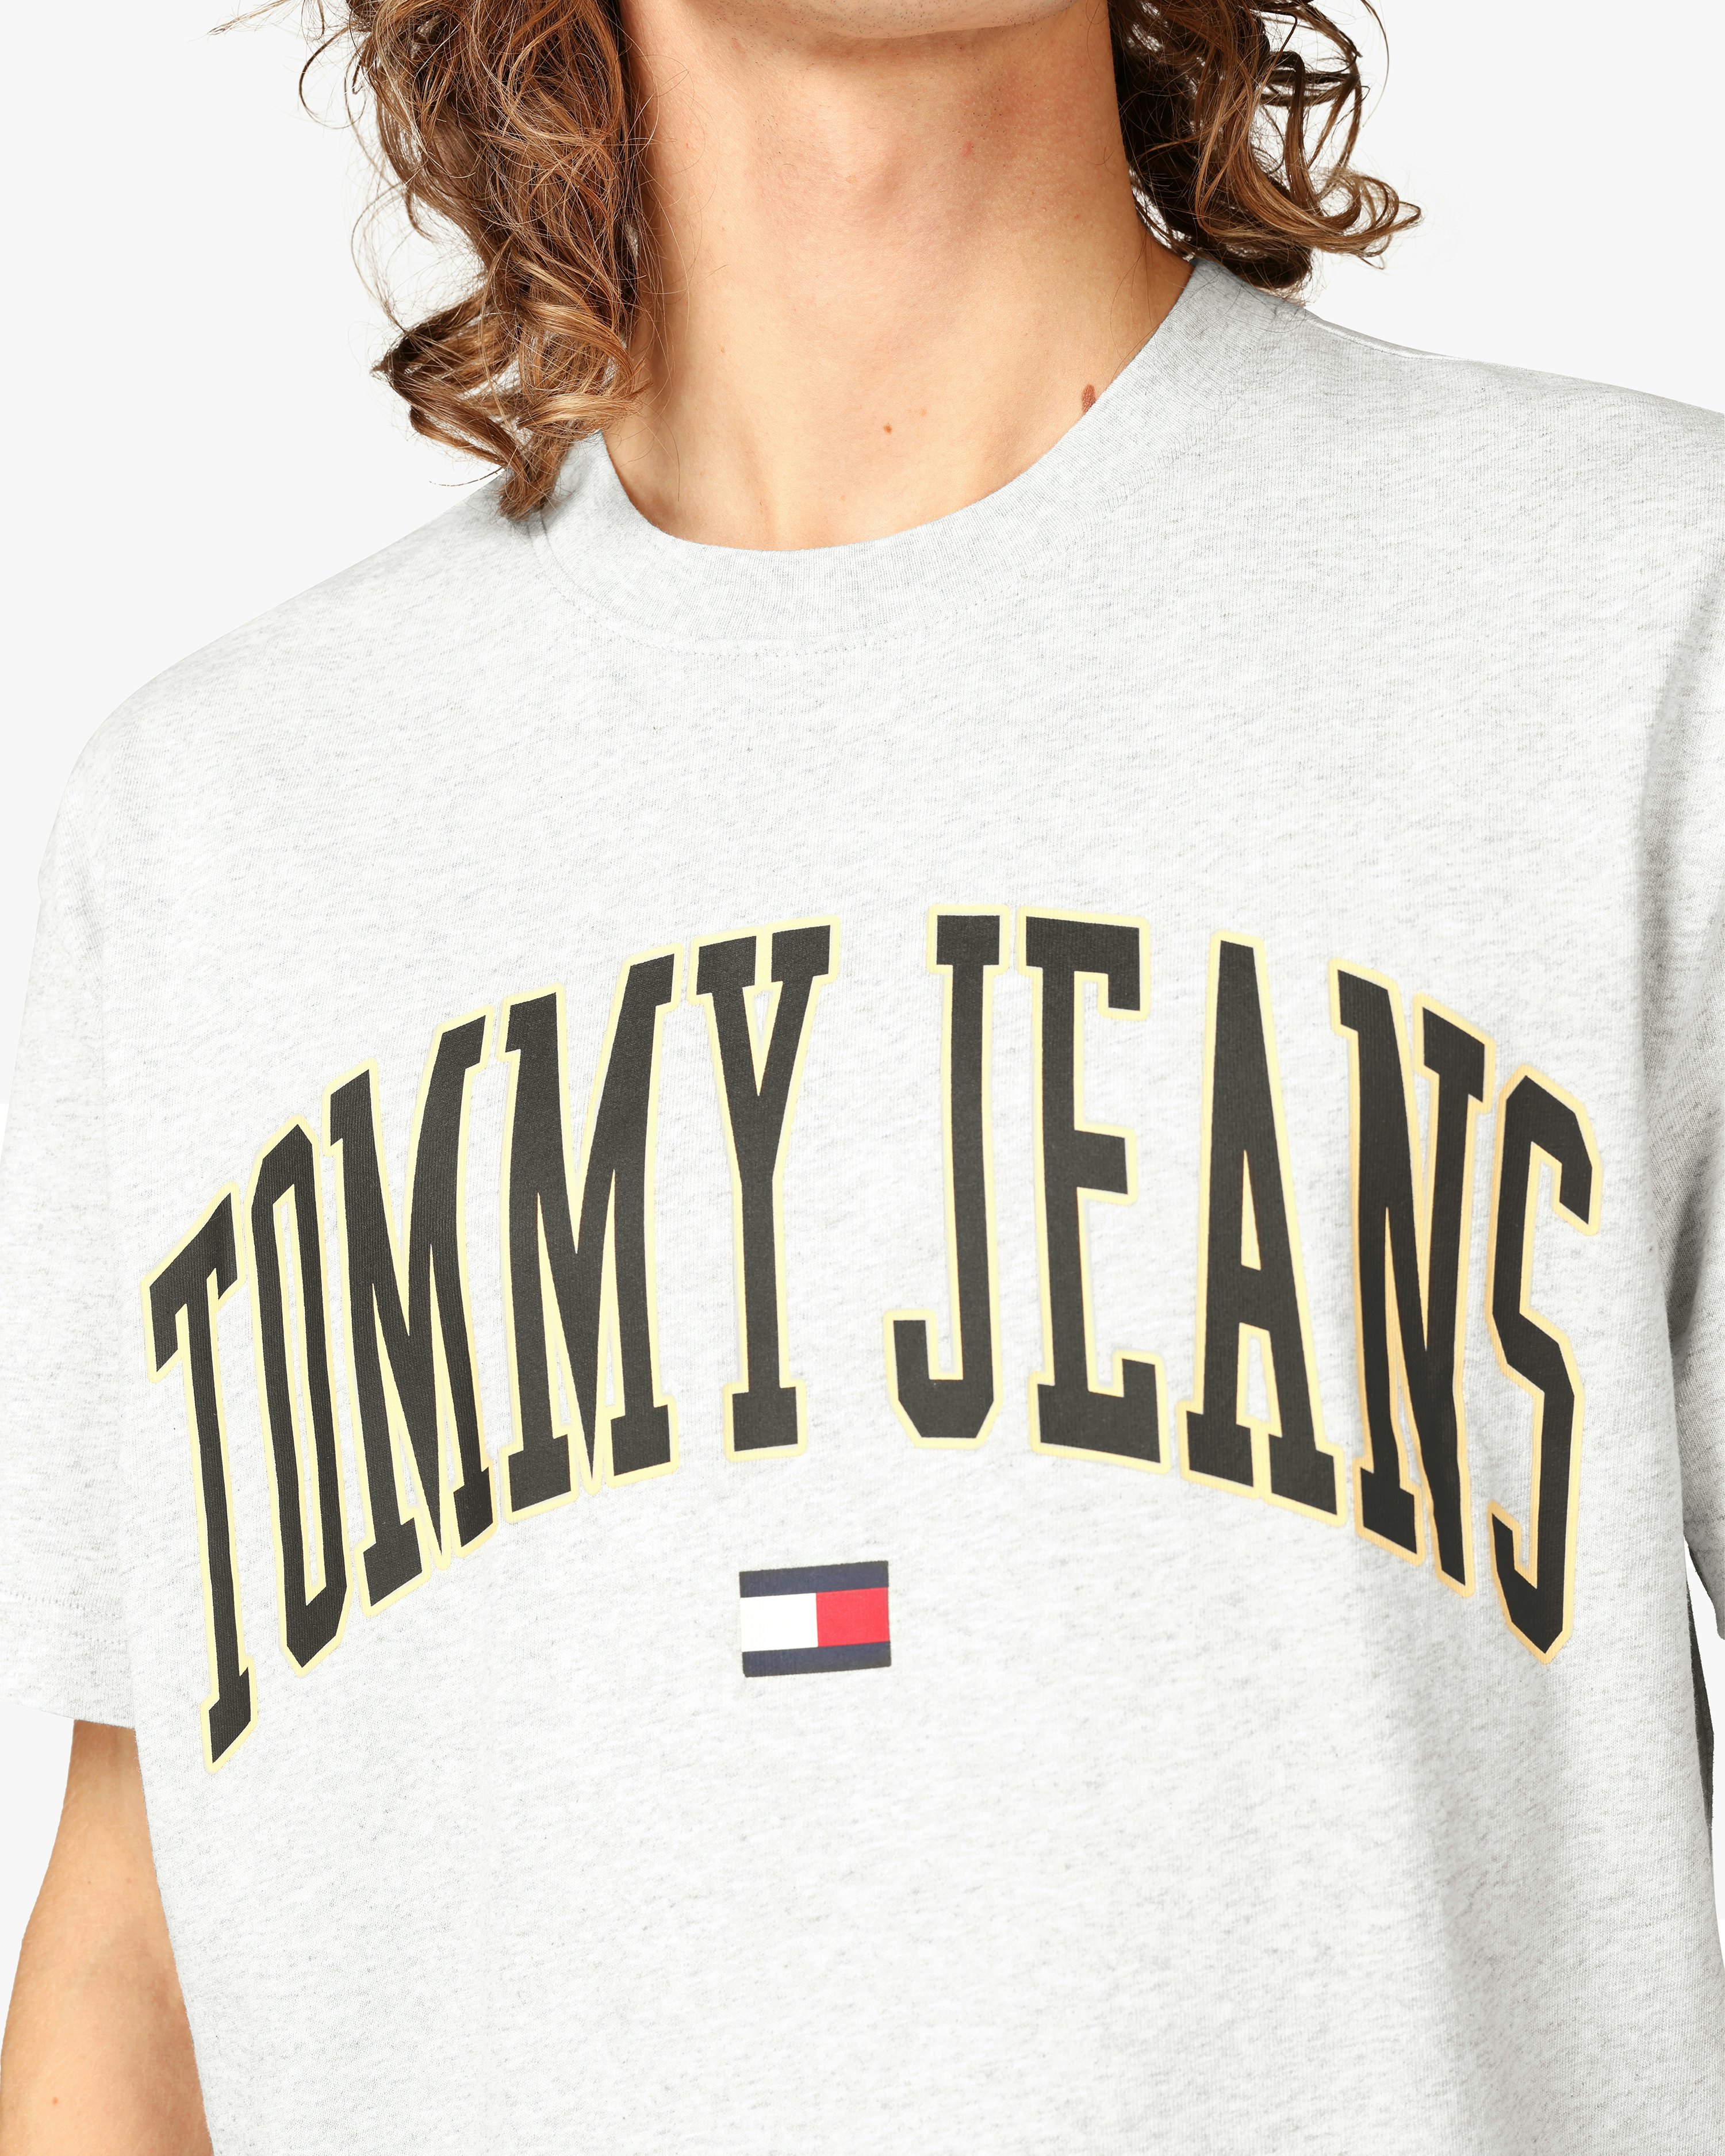 Tommy Jeans Classic Gold Arch Grey T-Shirt Grey melange | Men | at